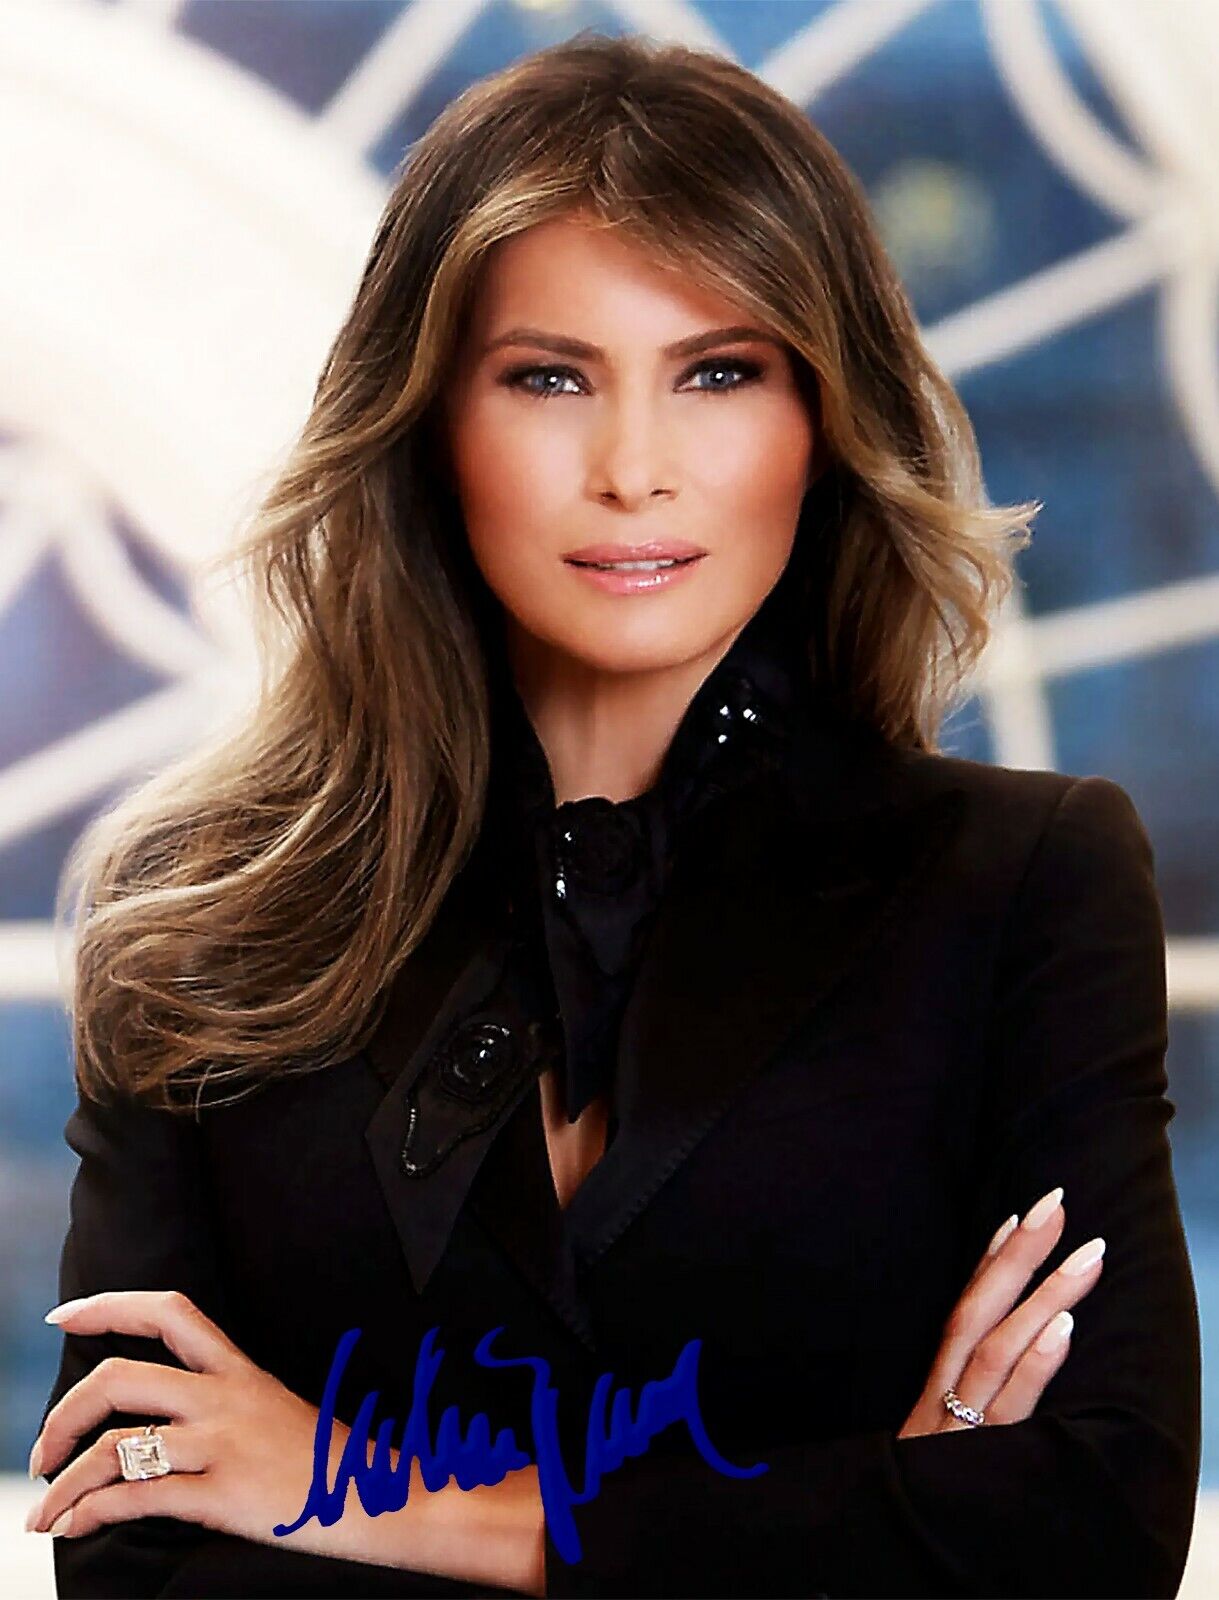 MELANIA TRUMP HOT SEXY 1ST LADY SIGNED AUTOGRAPH 8.5X11 Photo Poster painting PICTURE REPRINT